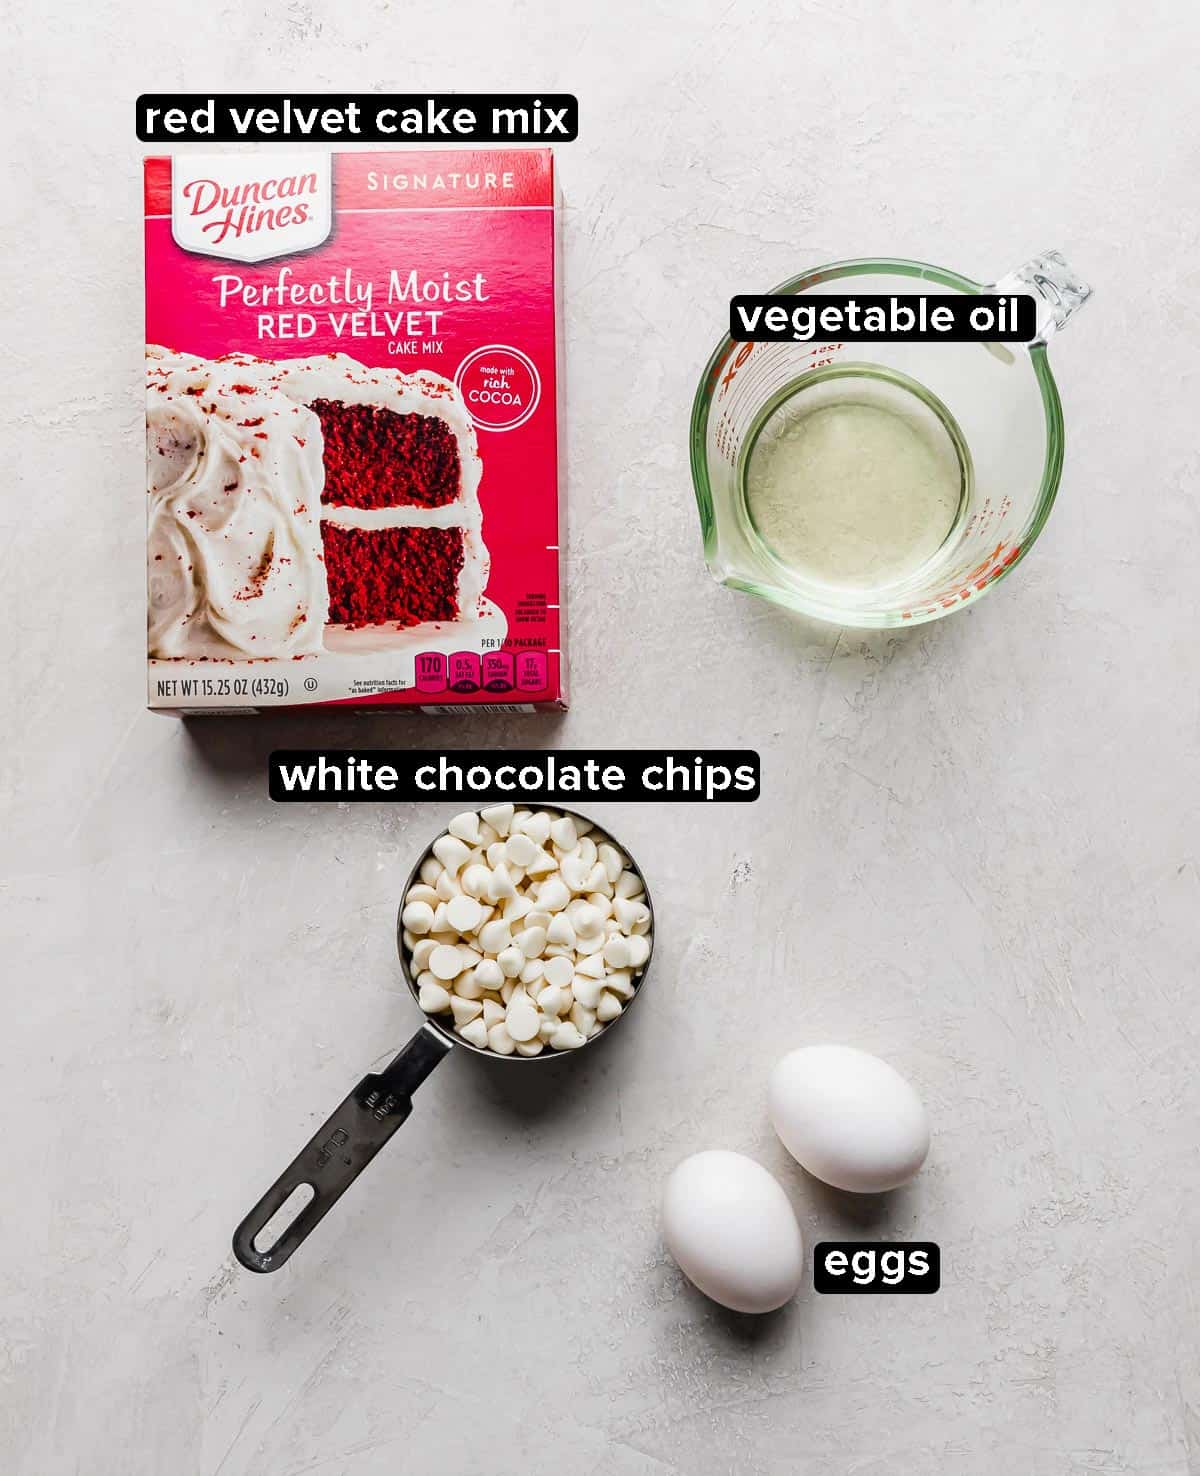 Ingredients used to make Red Velvet Cake Mix Cookies: cake mix, oil, eggs, white chocolate chips.